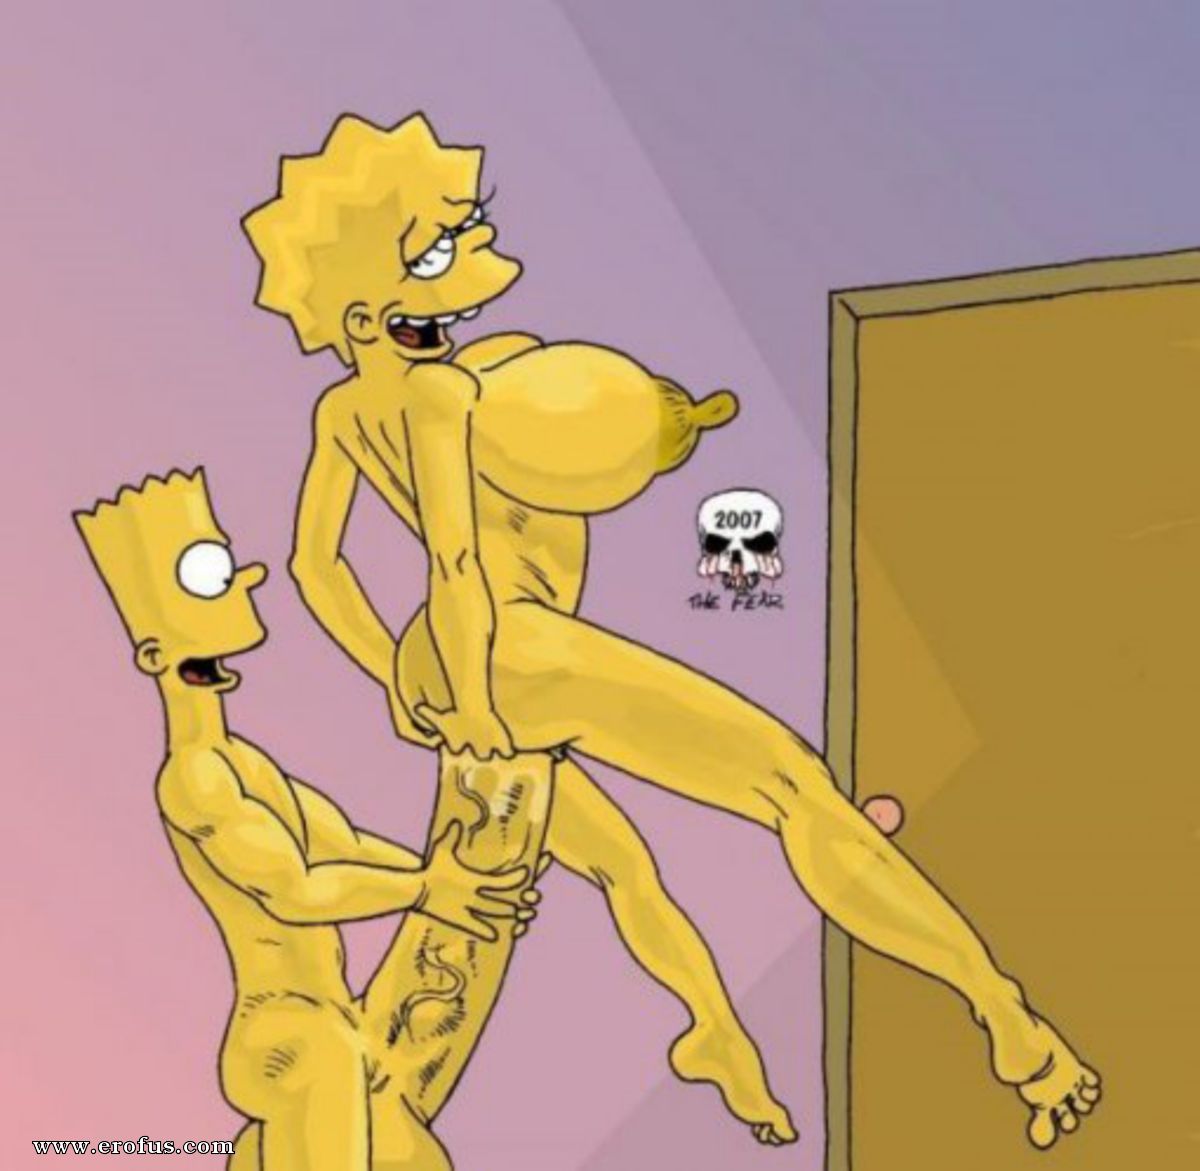 Simpsons porn by the fear